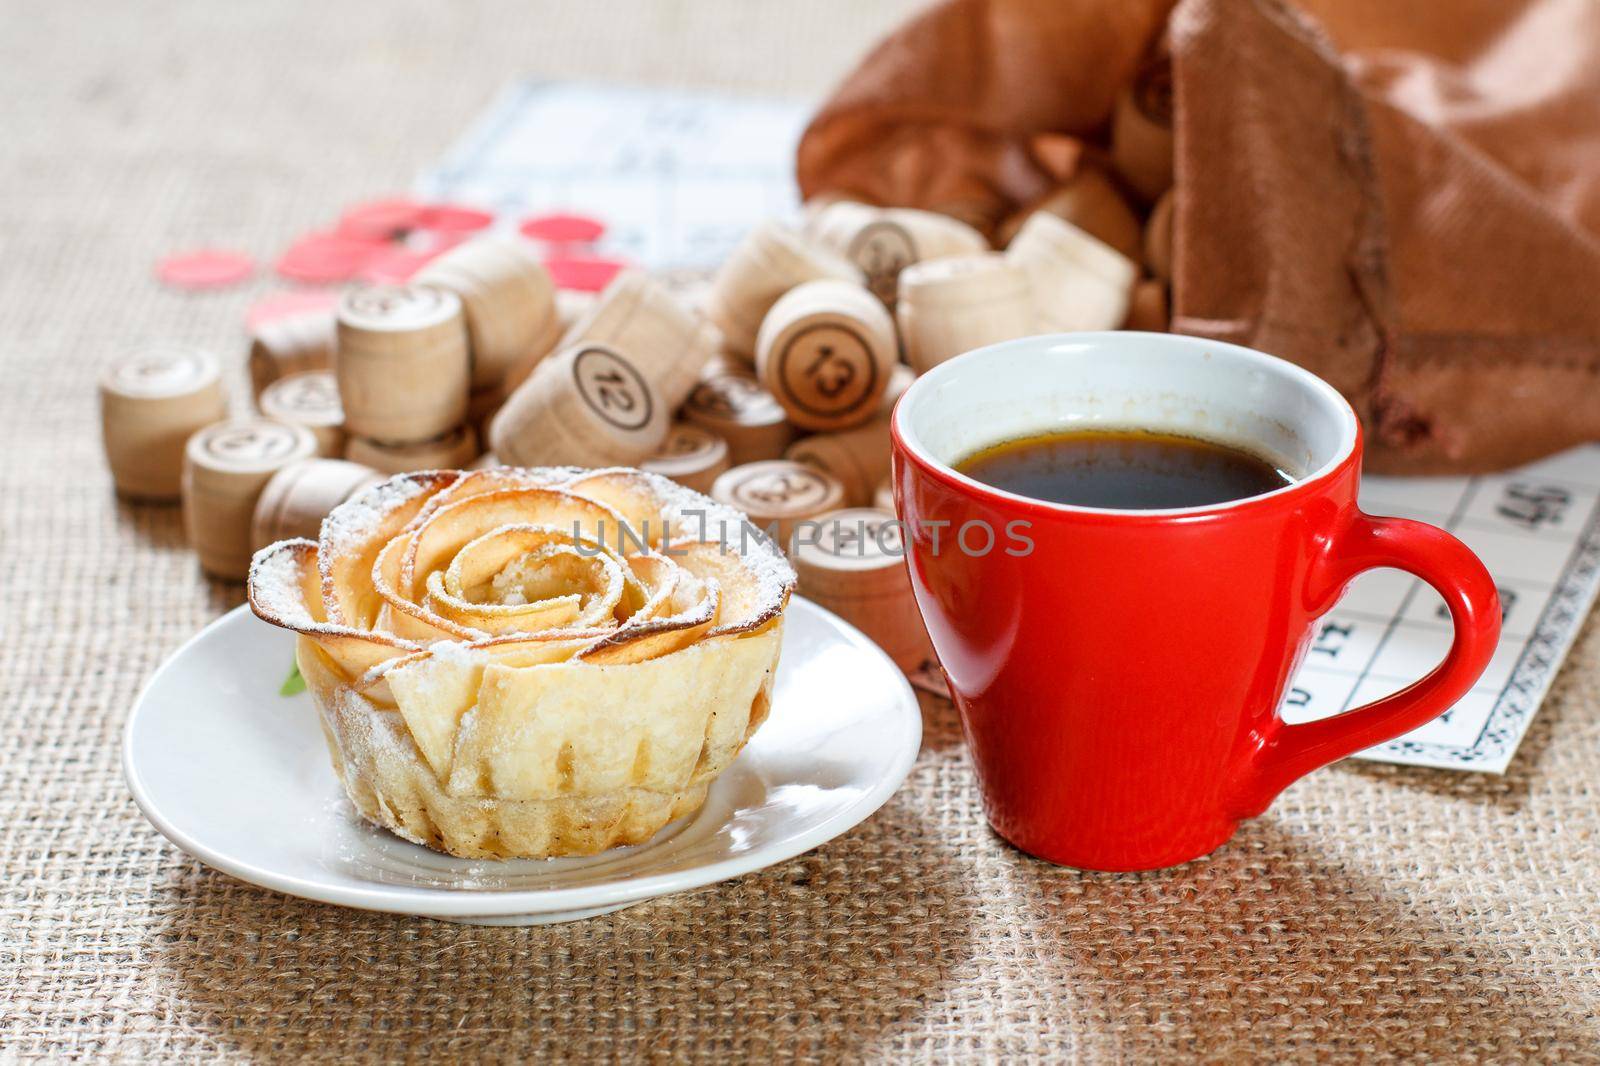 Wooden lotto barrels in brown pouch and game cards for a game in lotto with cup of coffee and homemade biscuit in the form of rose on white saucer